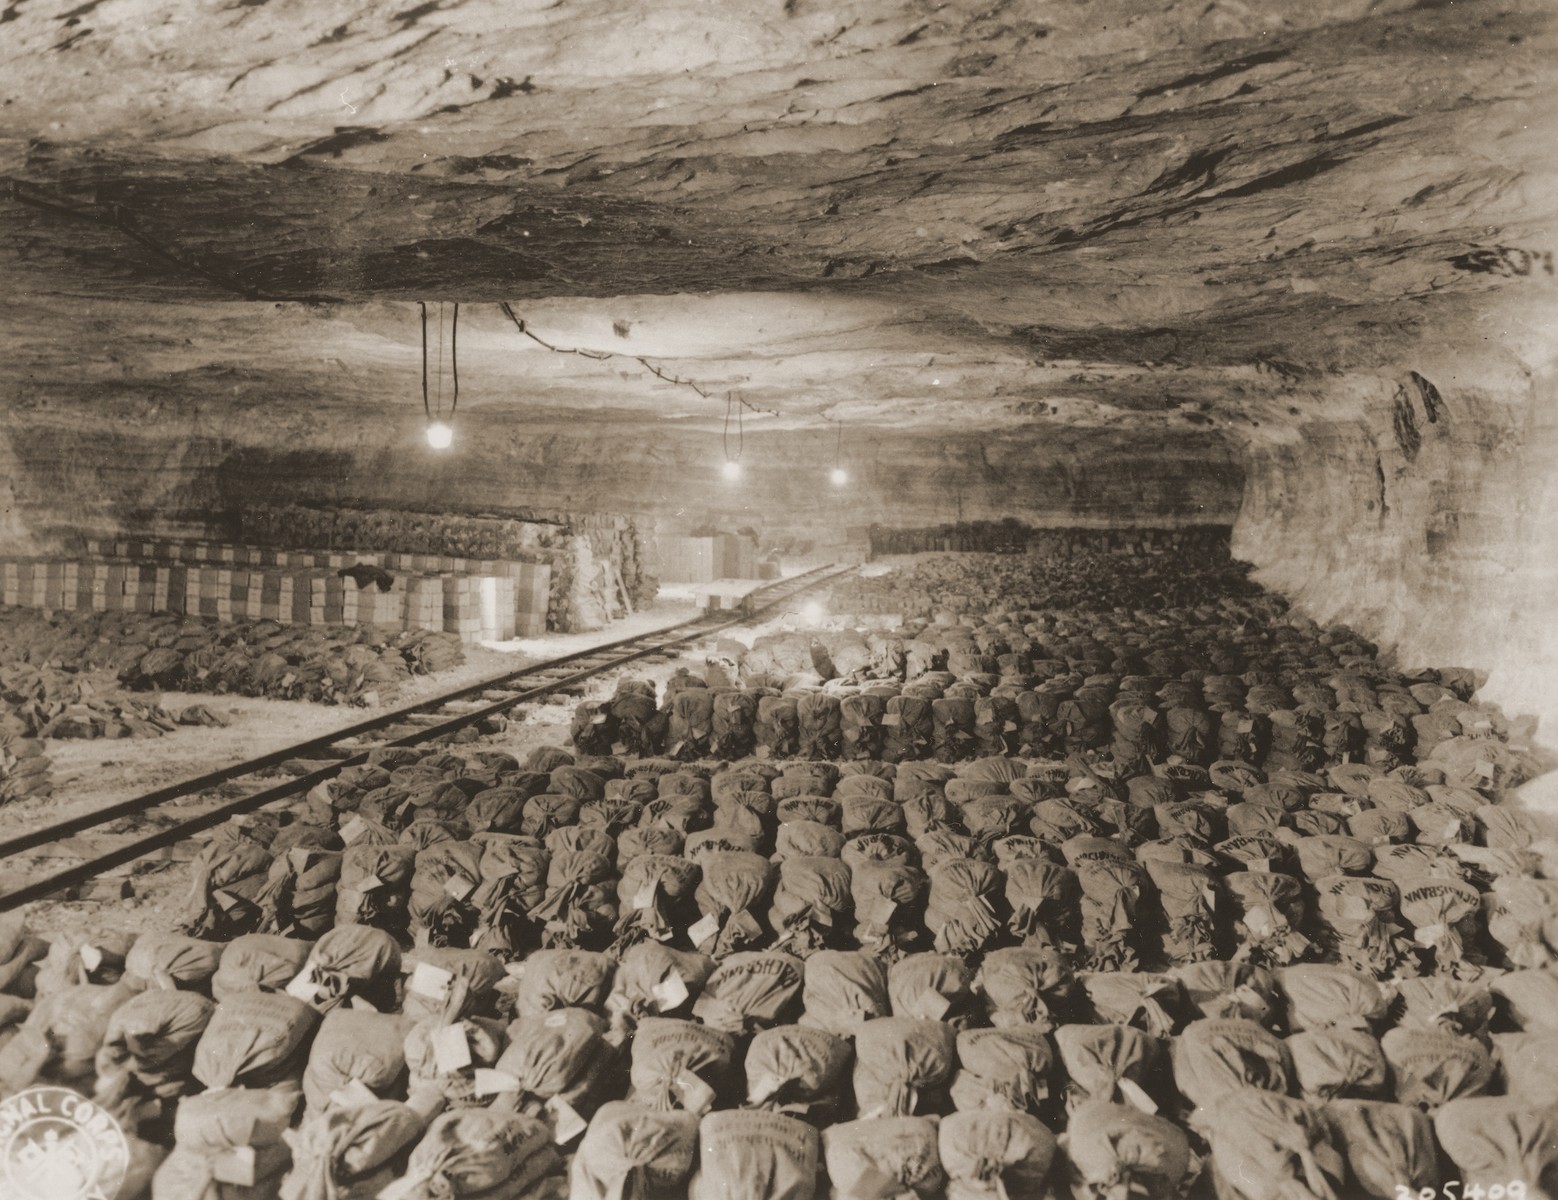 Bundles of currency, confiscated art, and other valuables from Berlin are uncovered by U.S. troops with the 90th Division, U.S. Third Army in the Merkers salt mine.